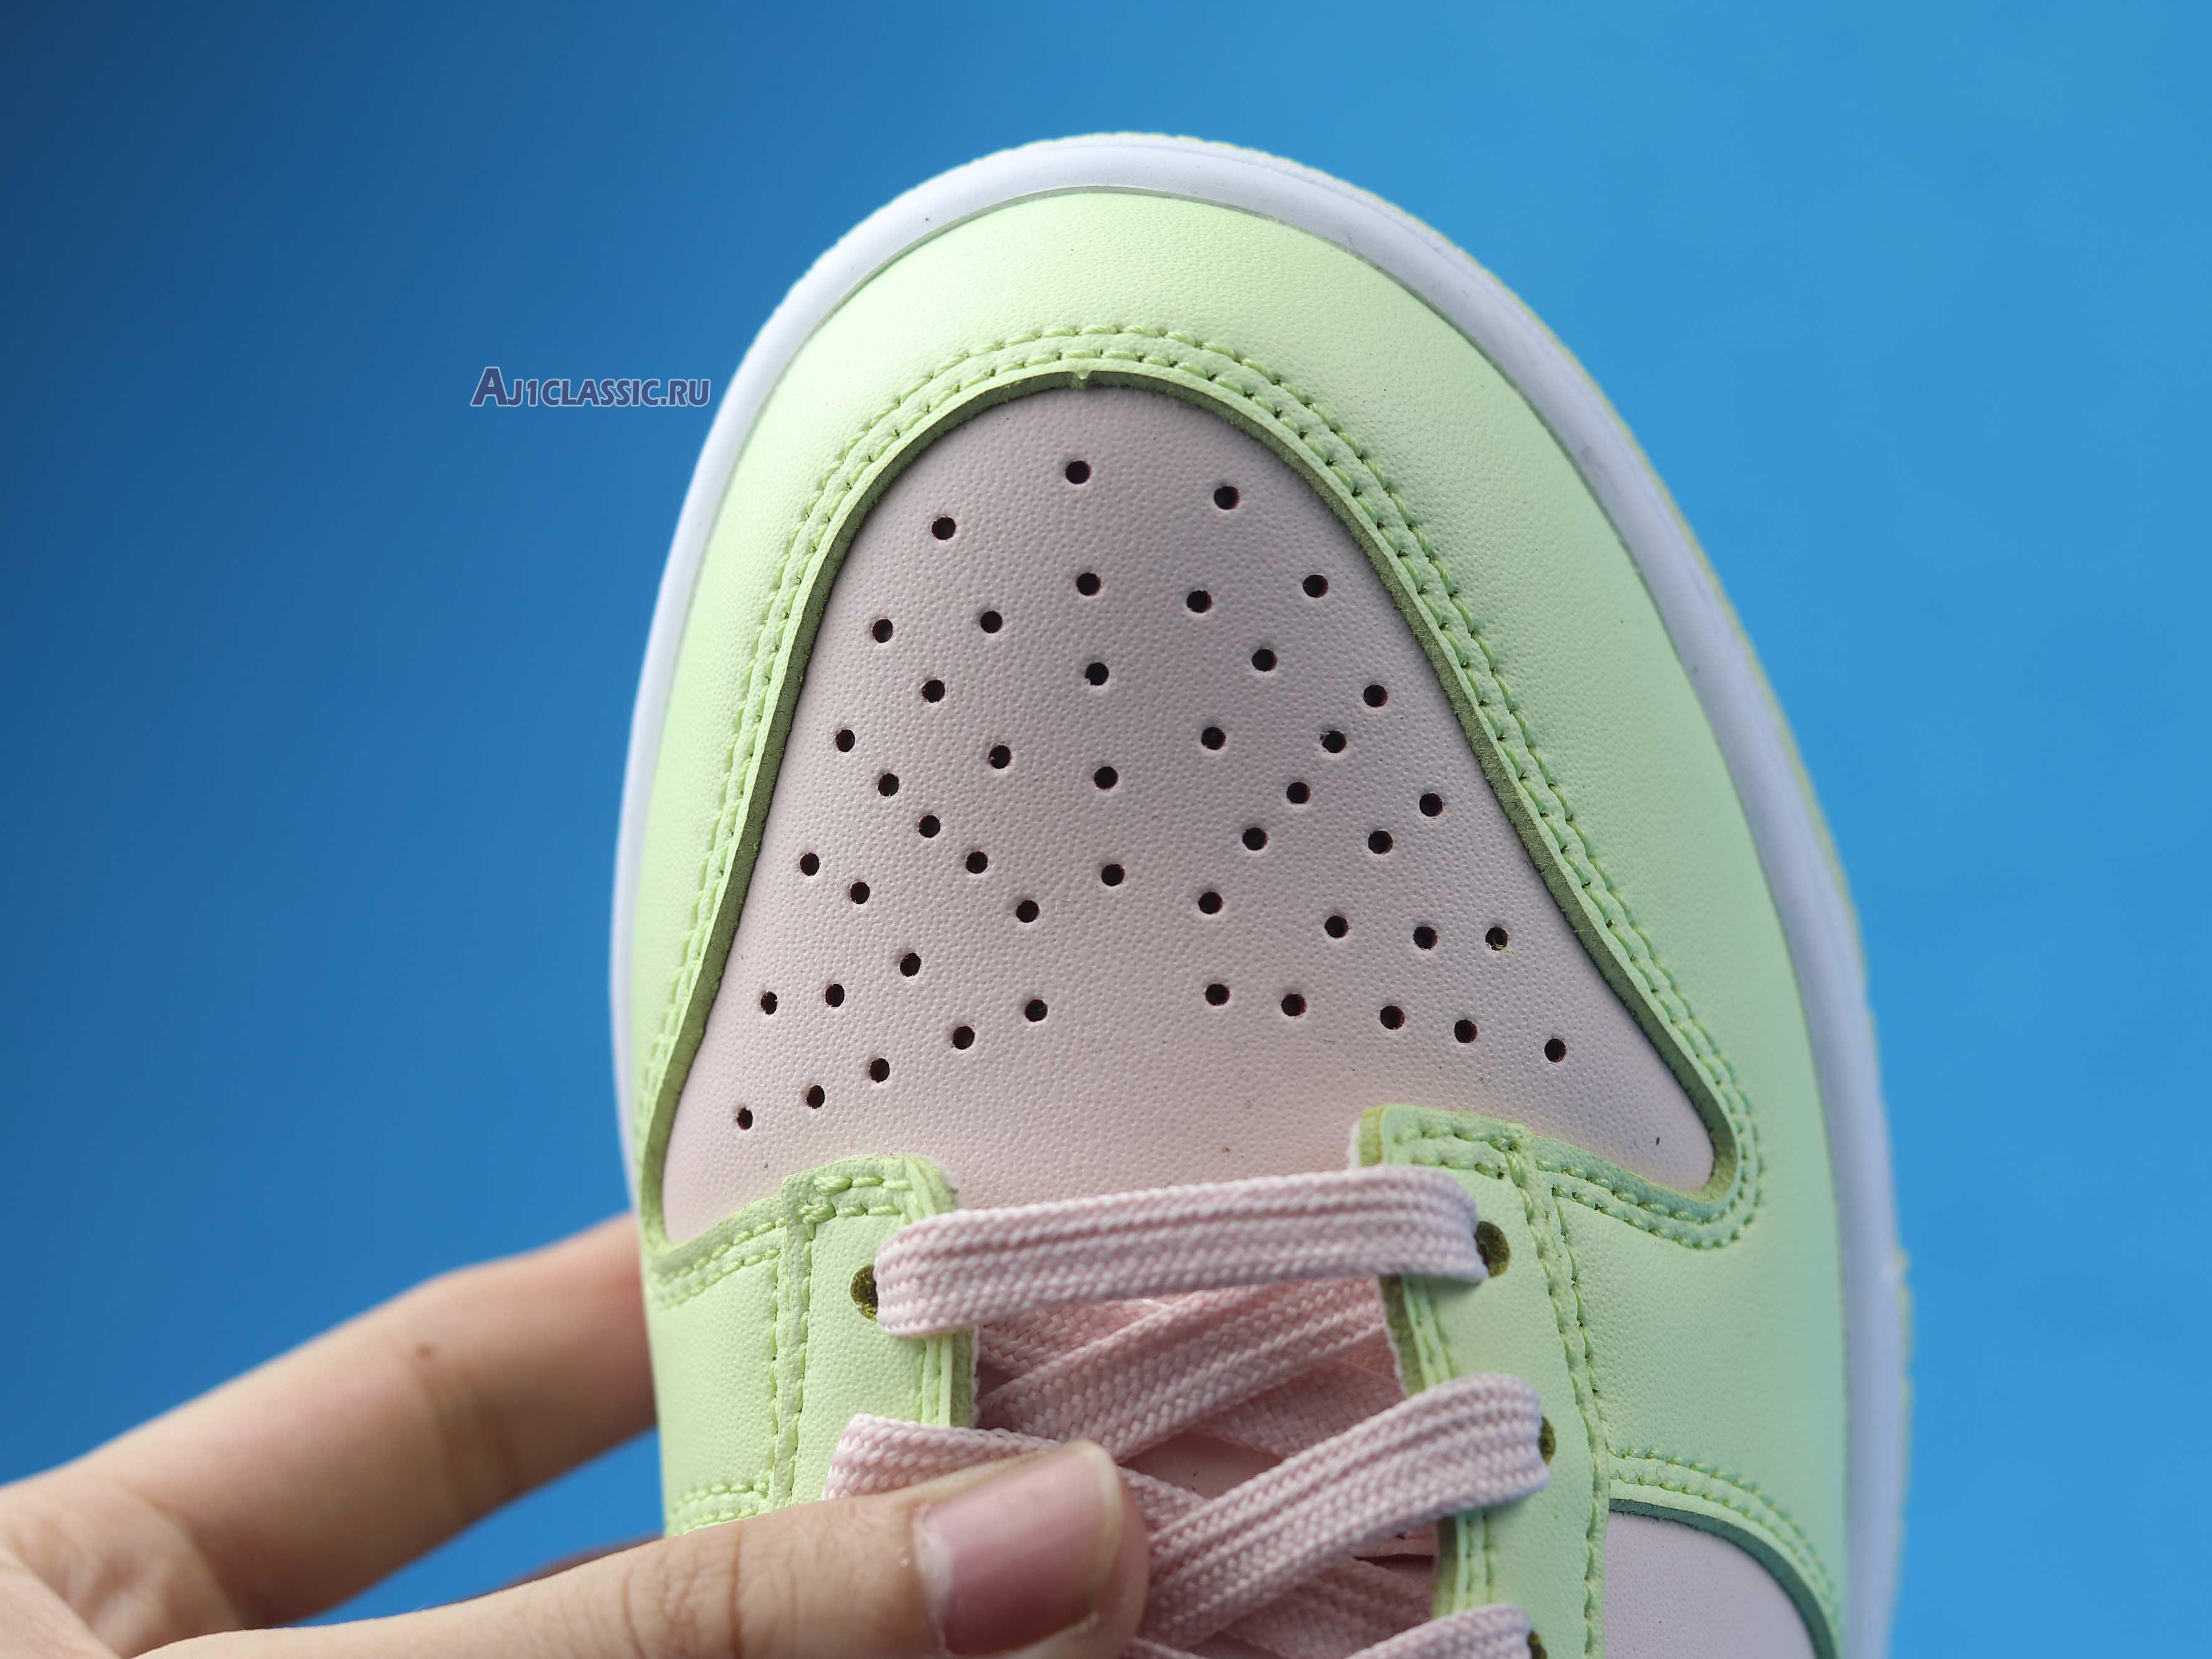 Nike Dunk Low "Lime Ice" DD1503-600